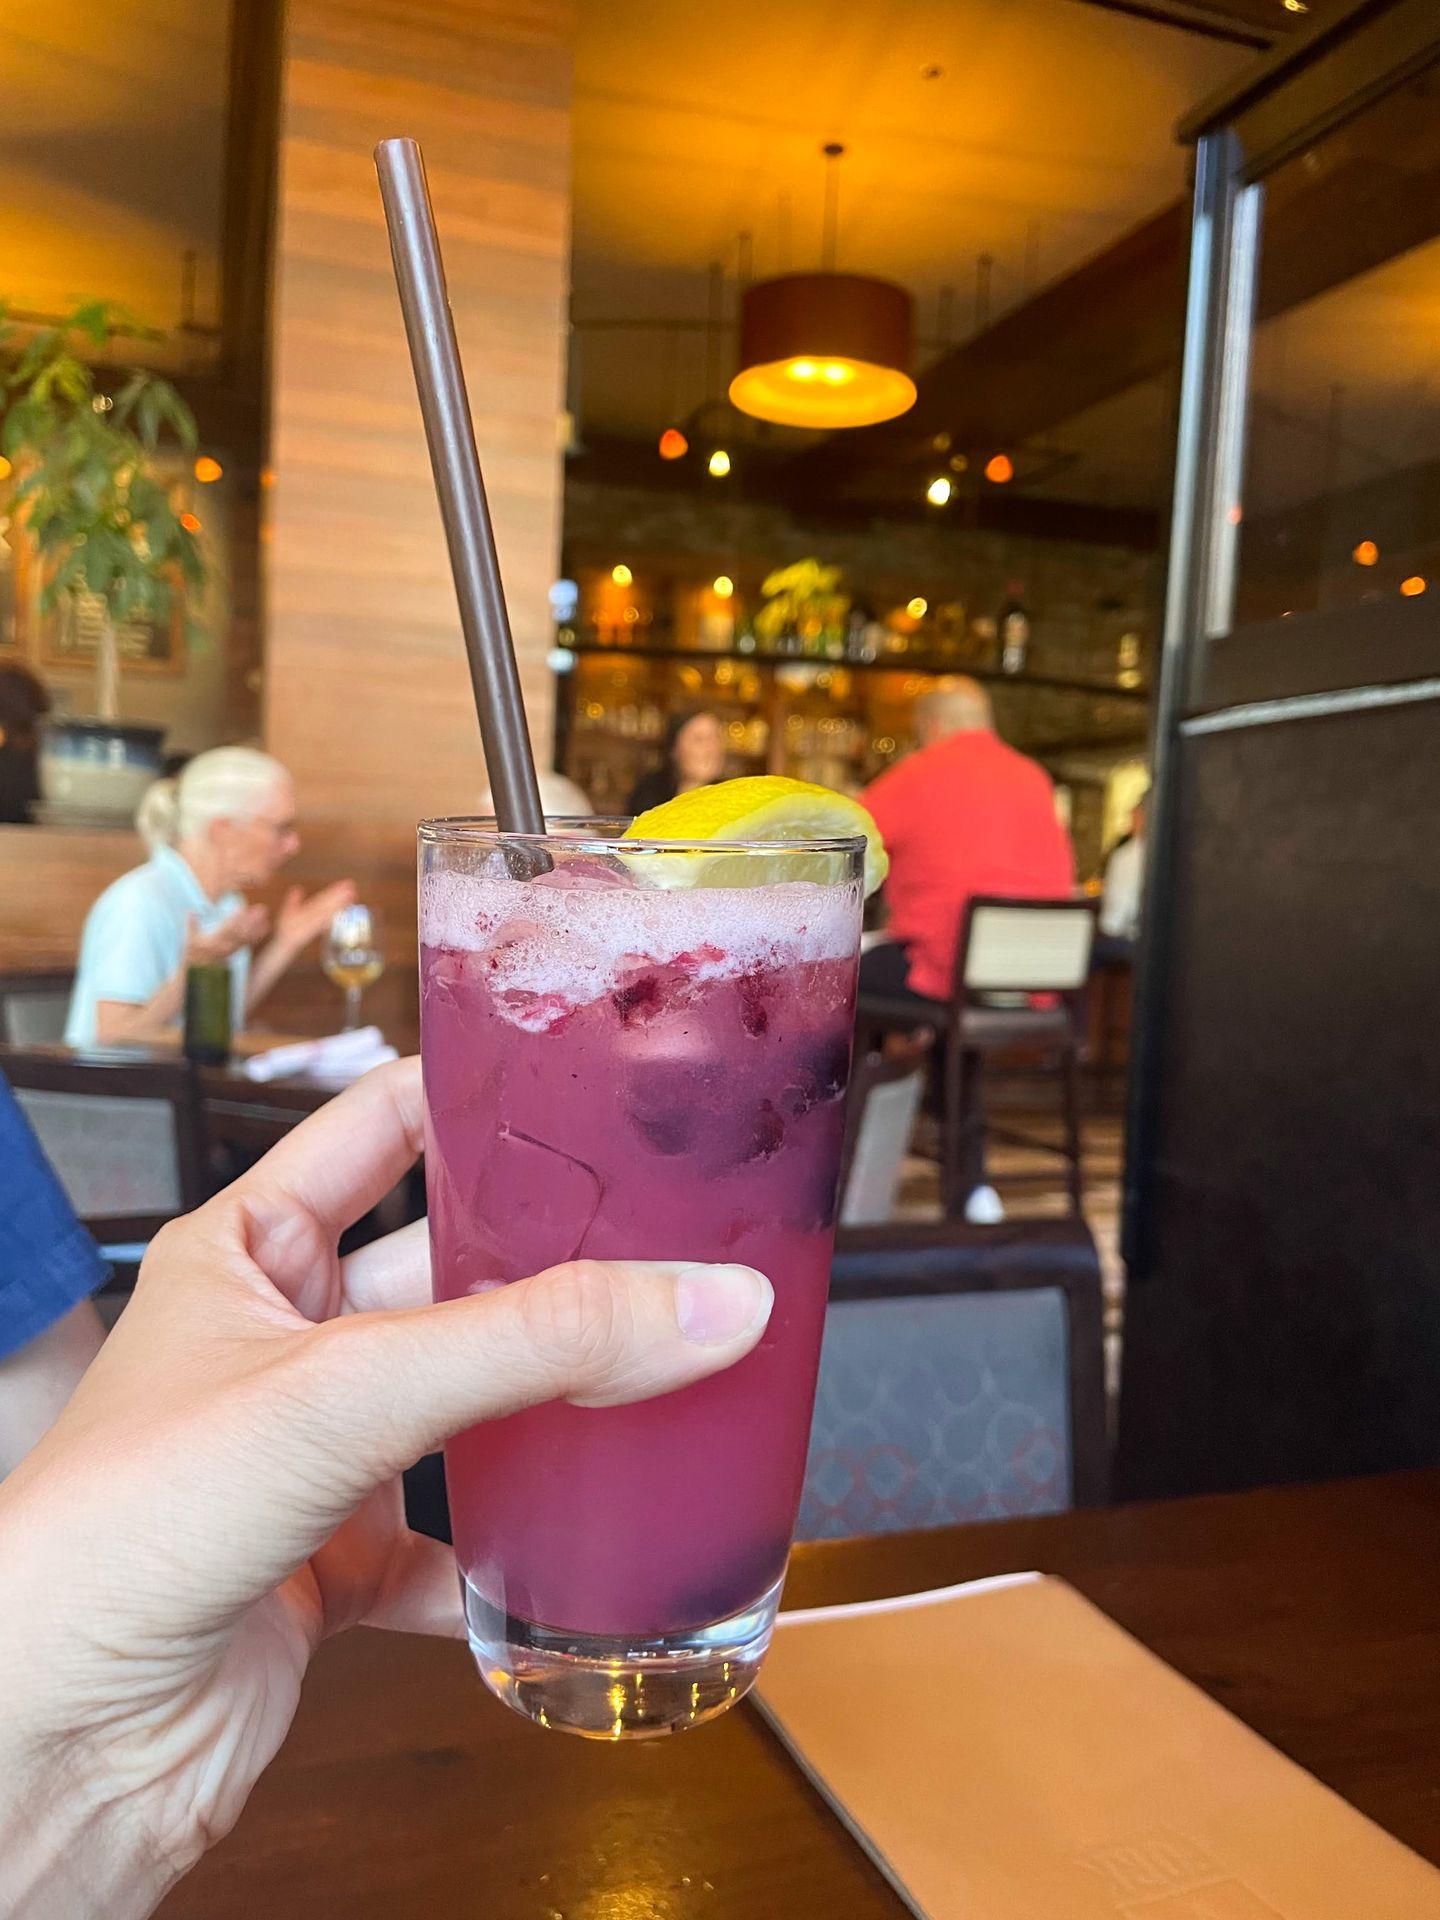 Holding up a purple cocktail from Fork in downtown Boise.